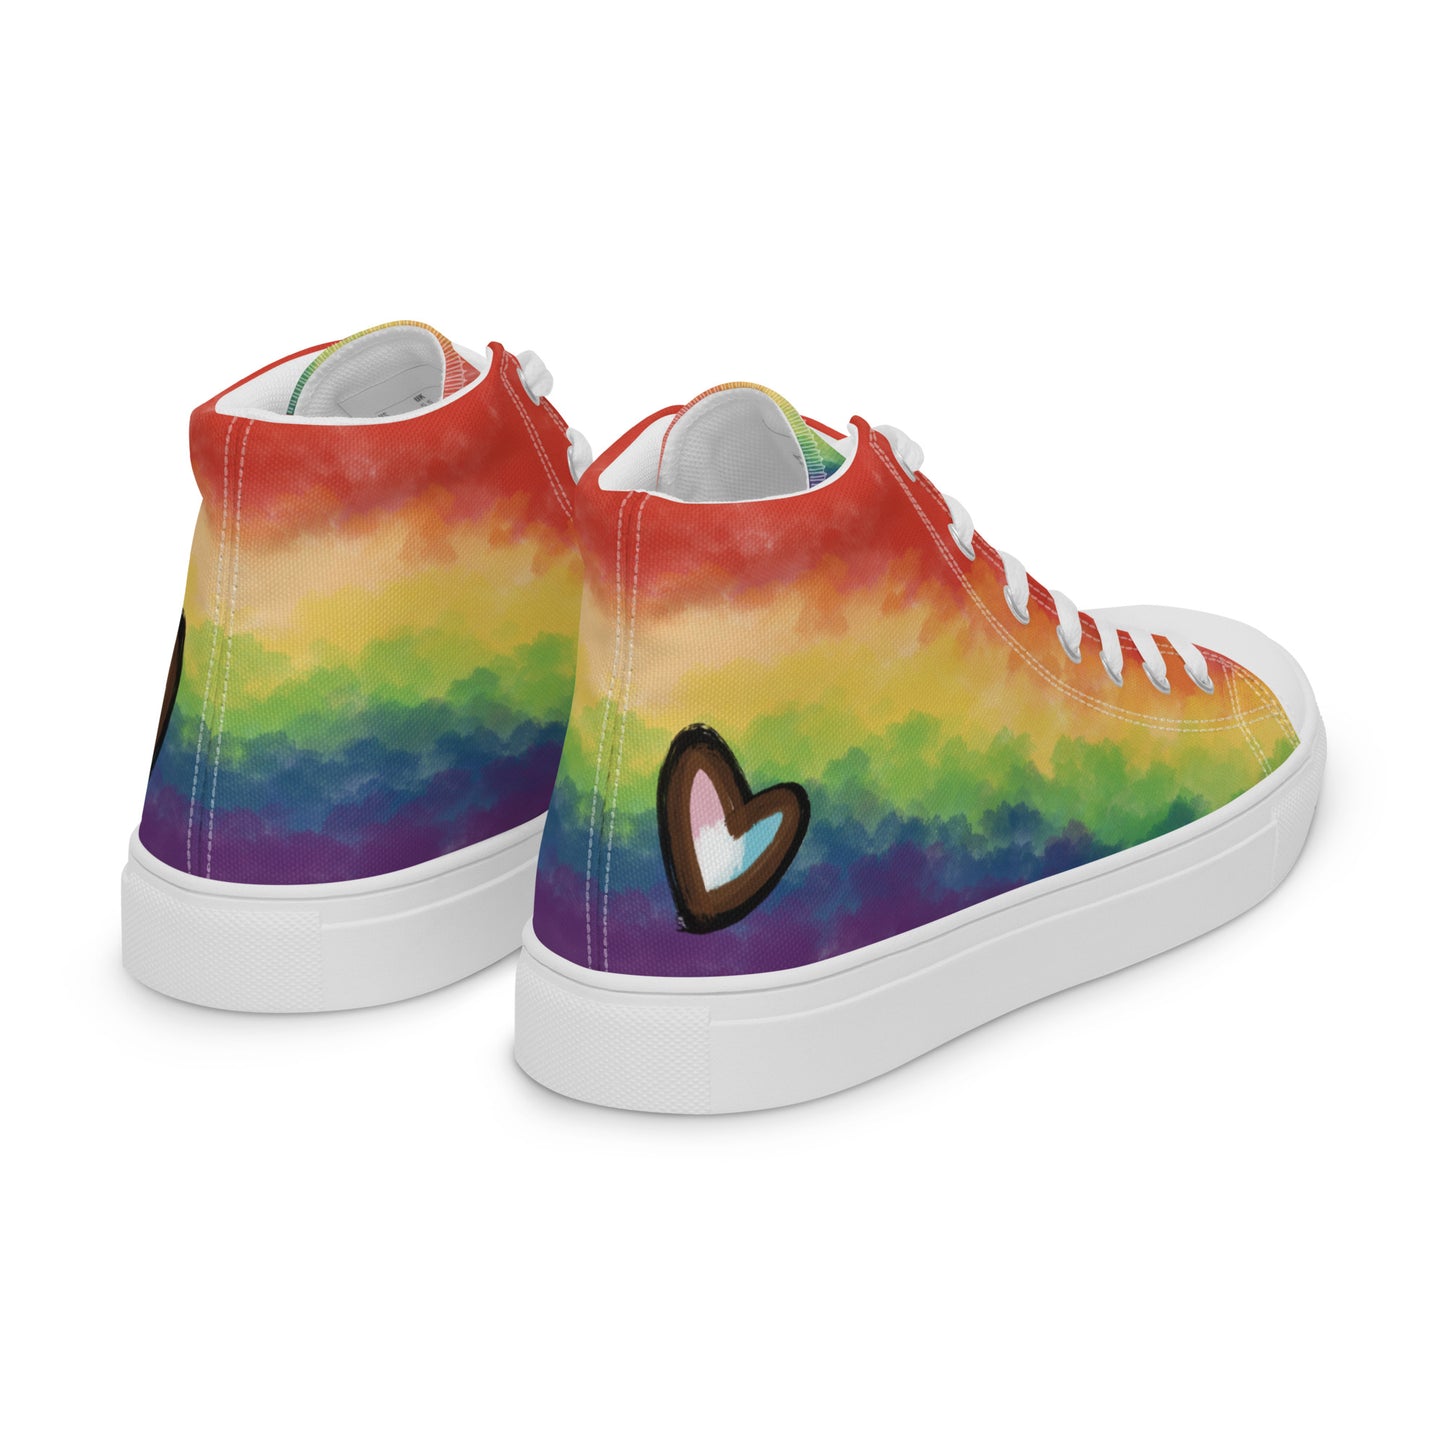 Right back view: A pair of high top shoes with rainbow striped clouds on the sides and a double heart in black and brown with the trans flag colors inside.